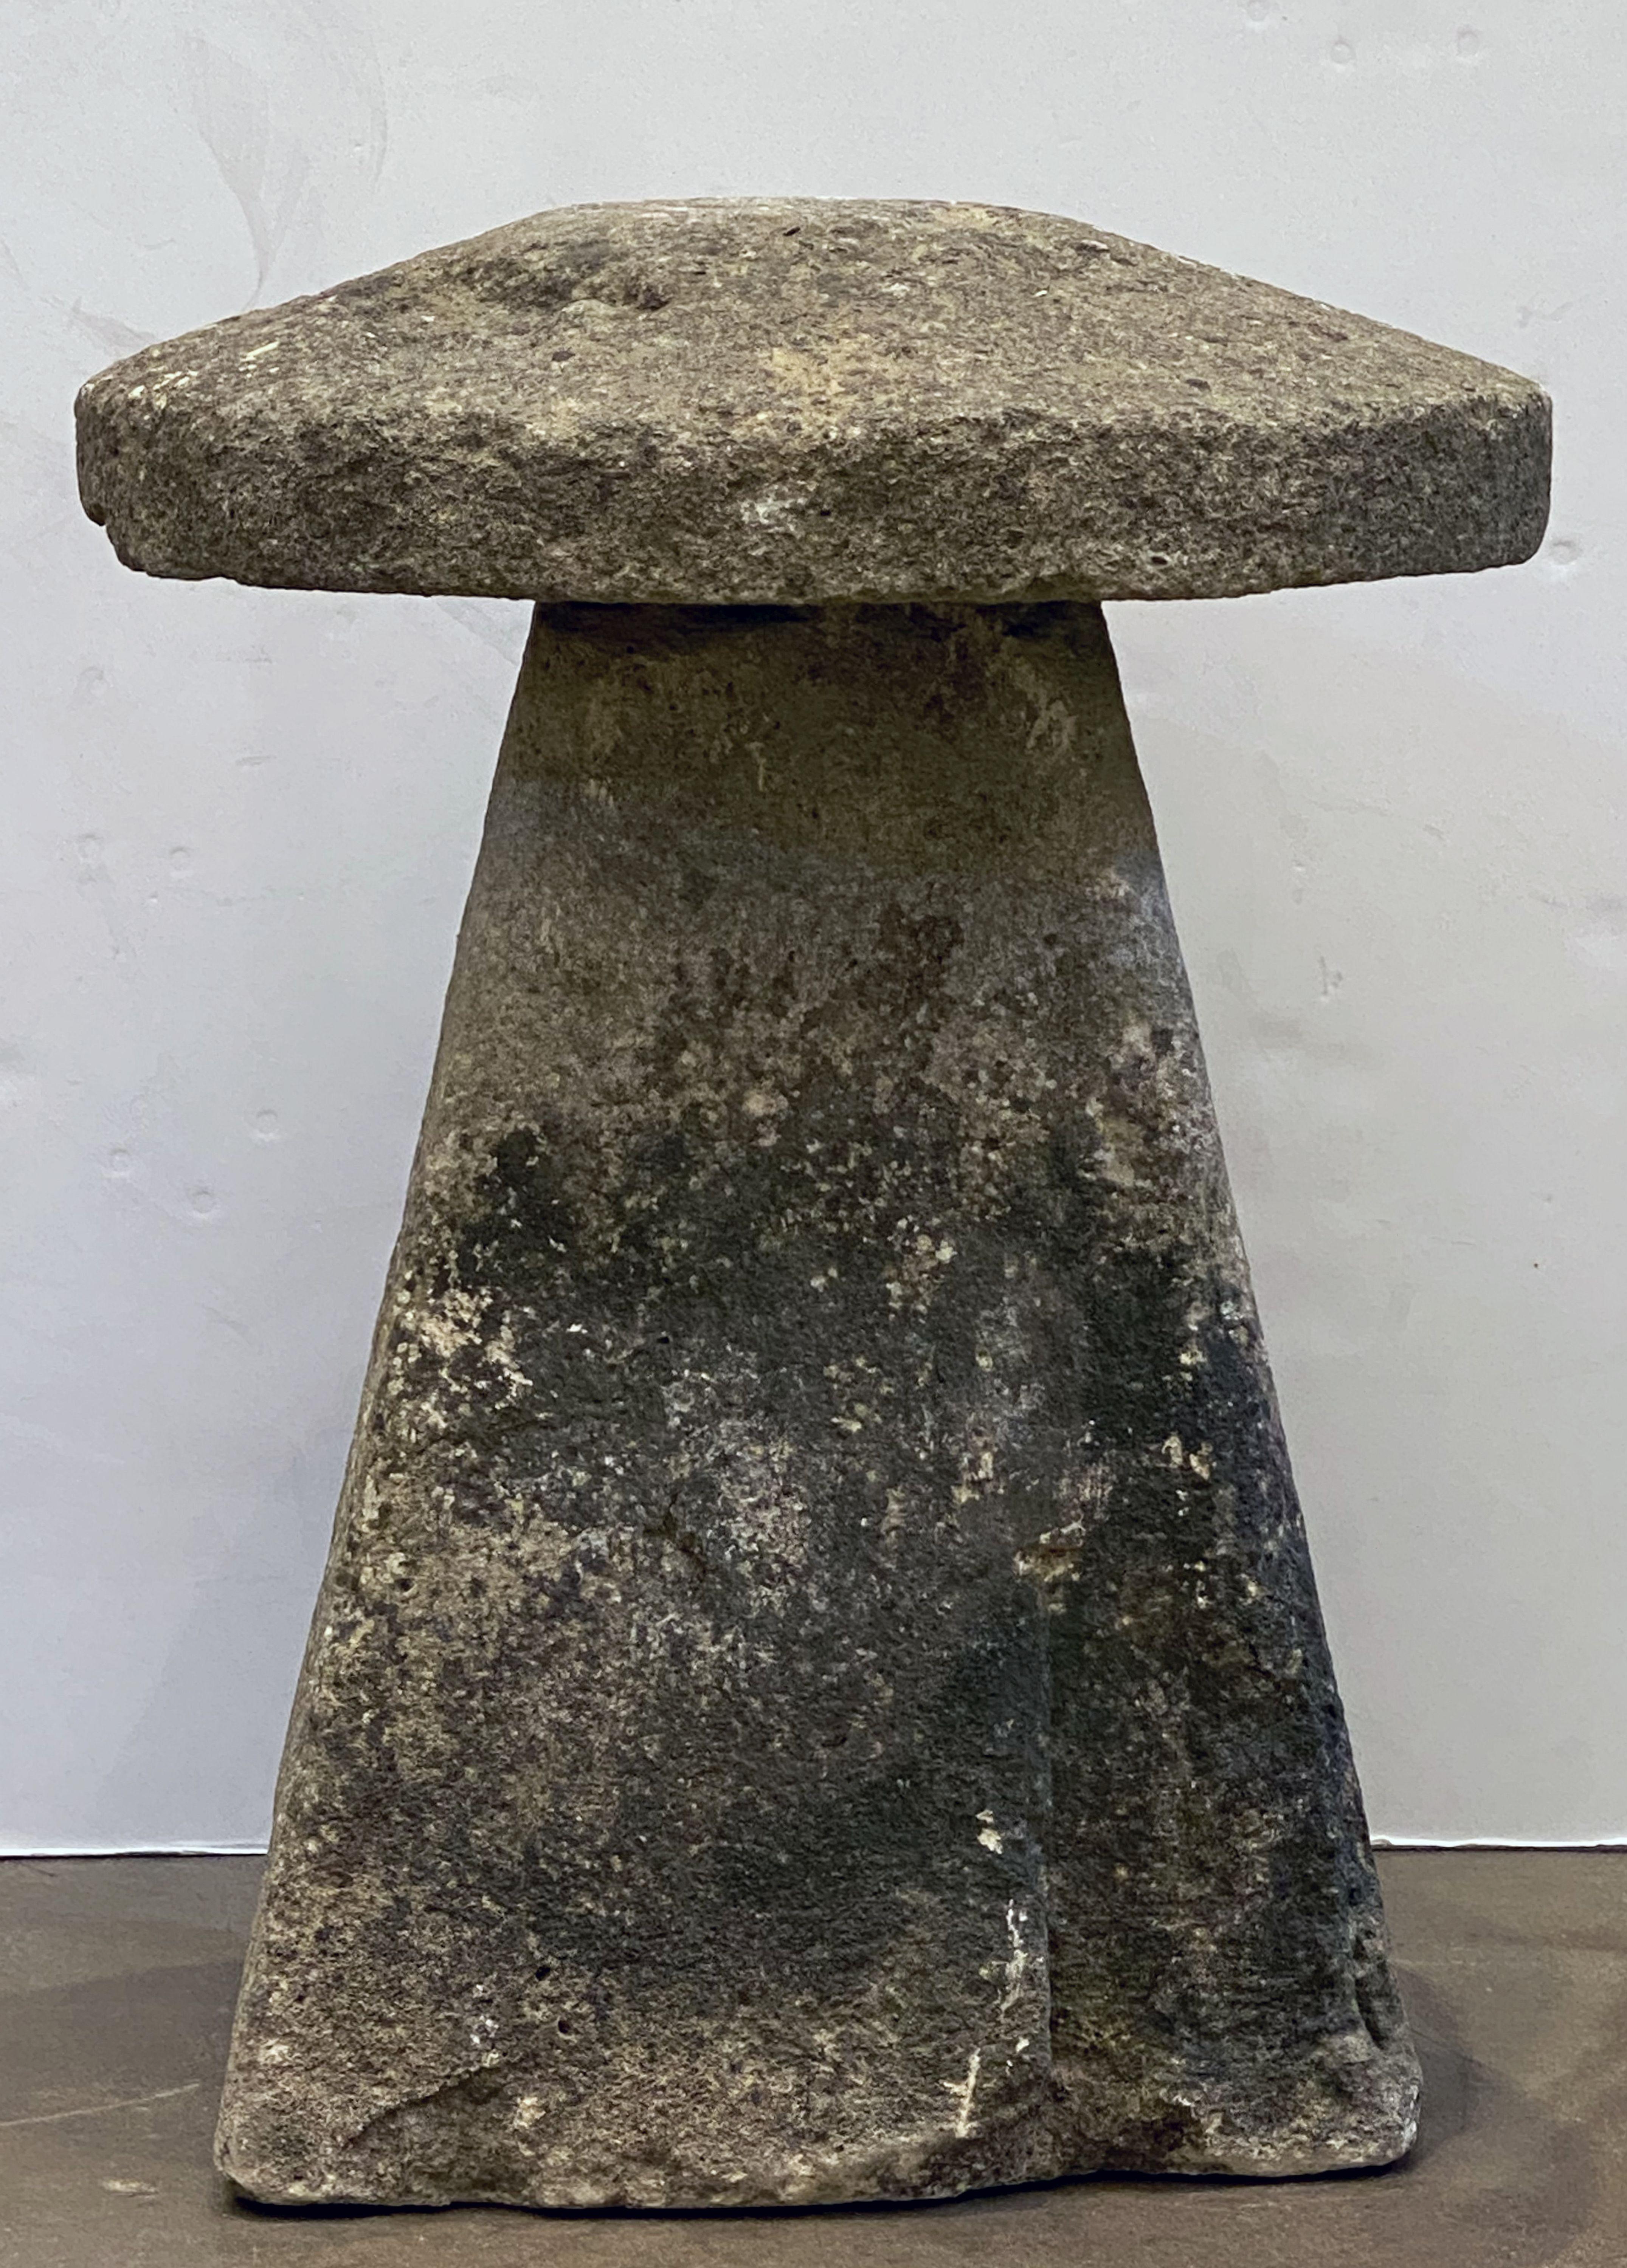 A steddle or staddle stone from the West Country of England, featuring a conical base mounted with a mushroom-shaped cap of quarried stone.

Use outdoors or indoors to create a contemporary or rustic English-garden effect. They are often used in